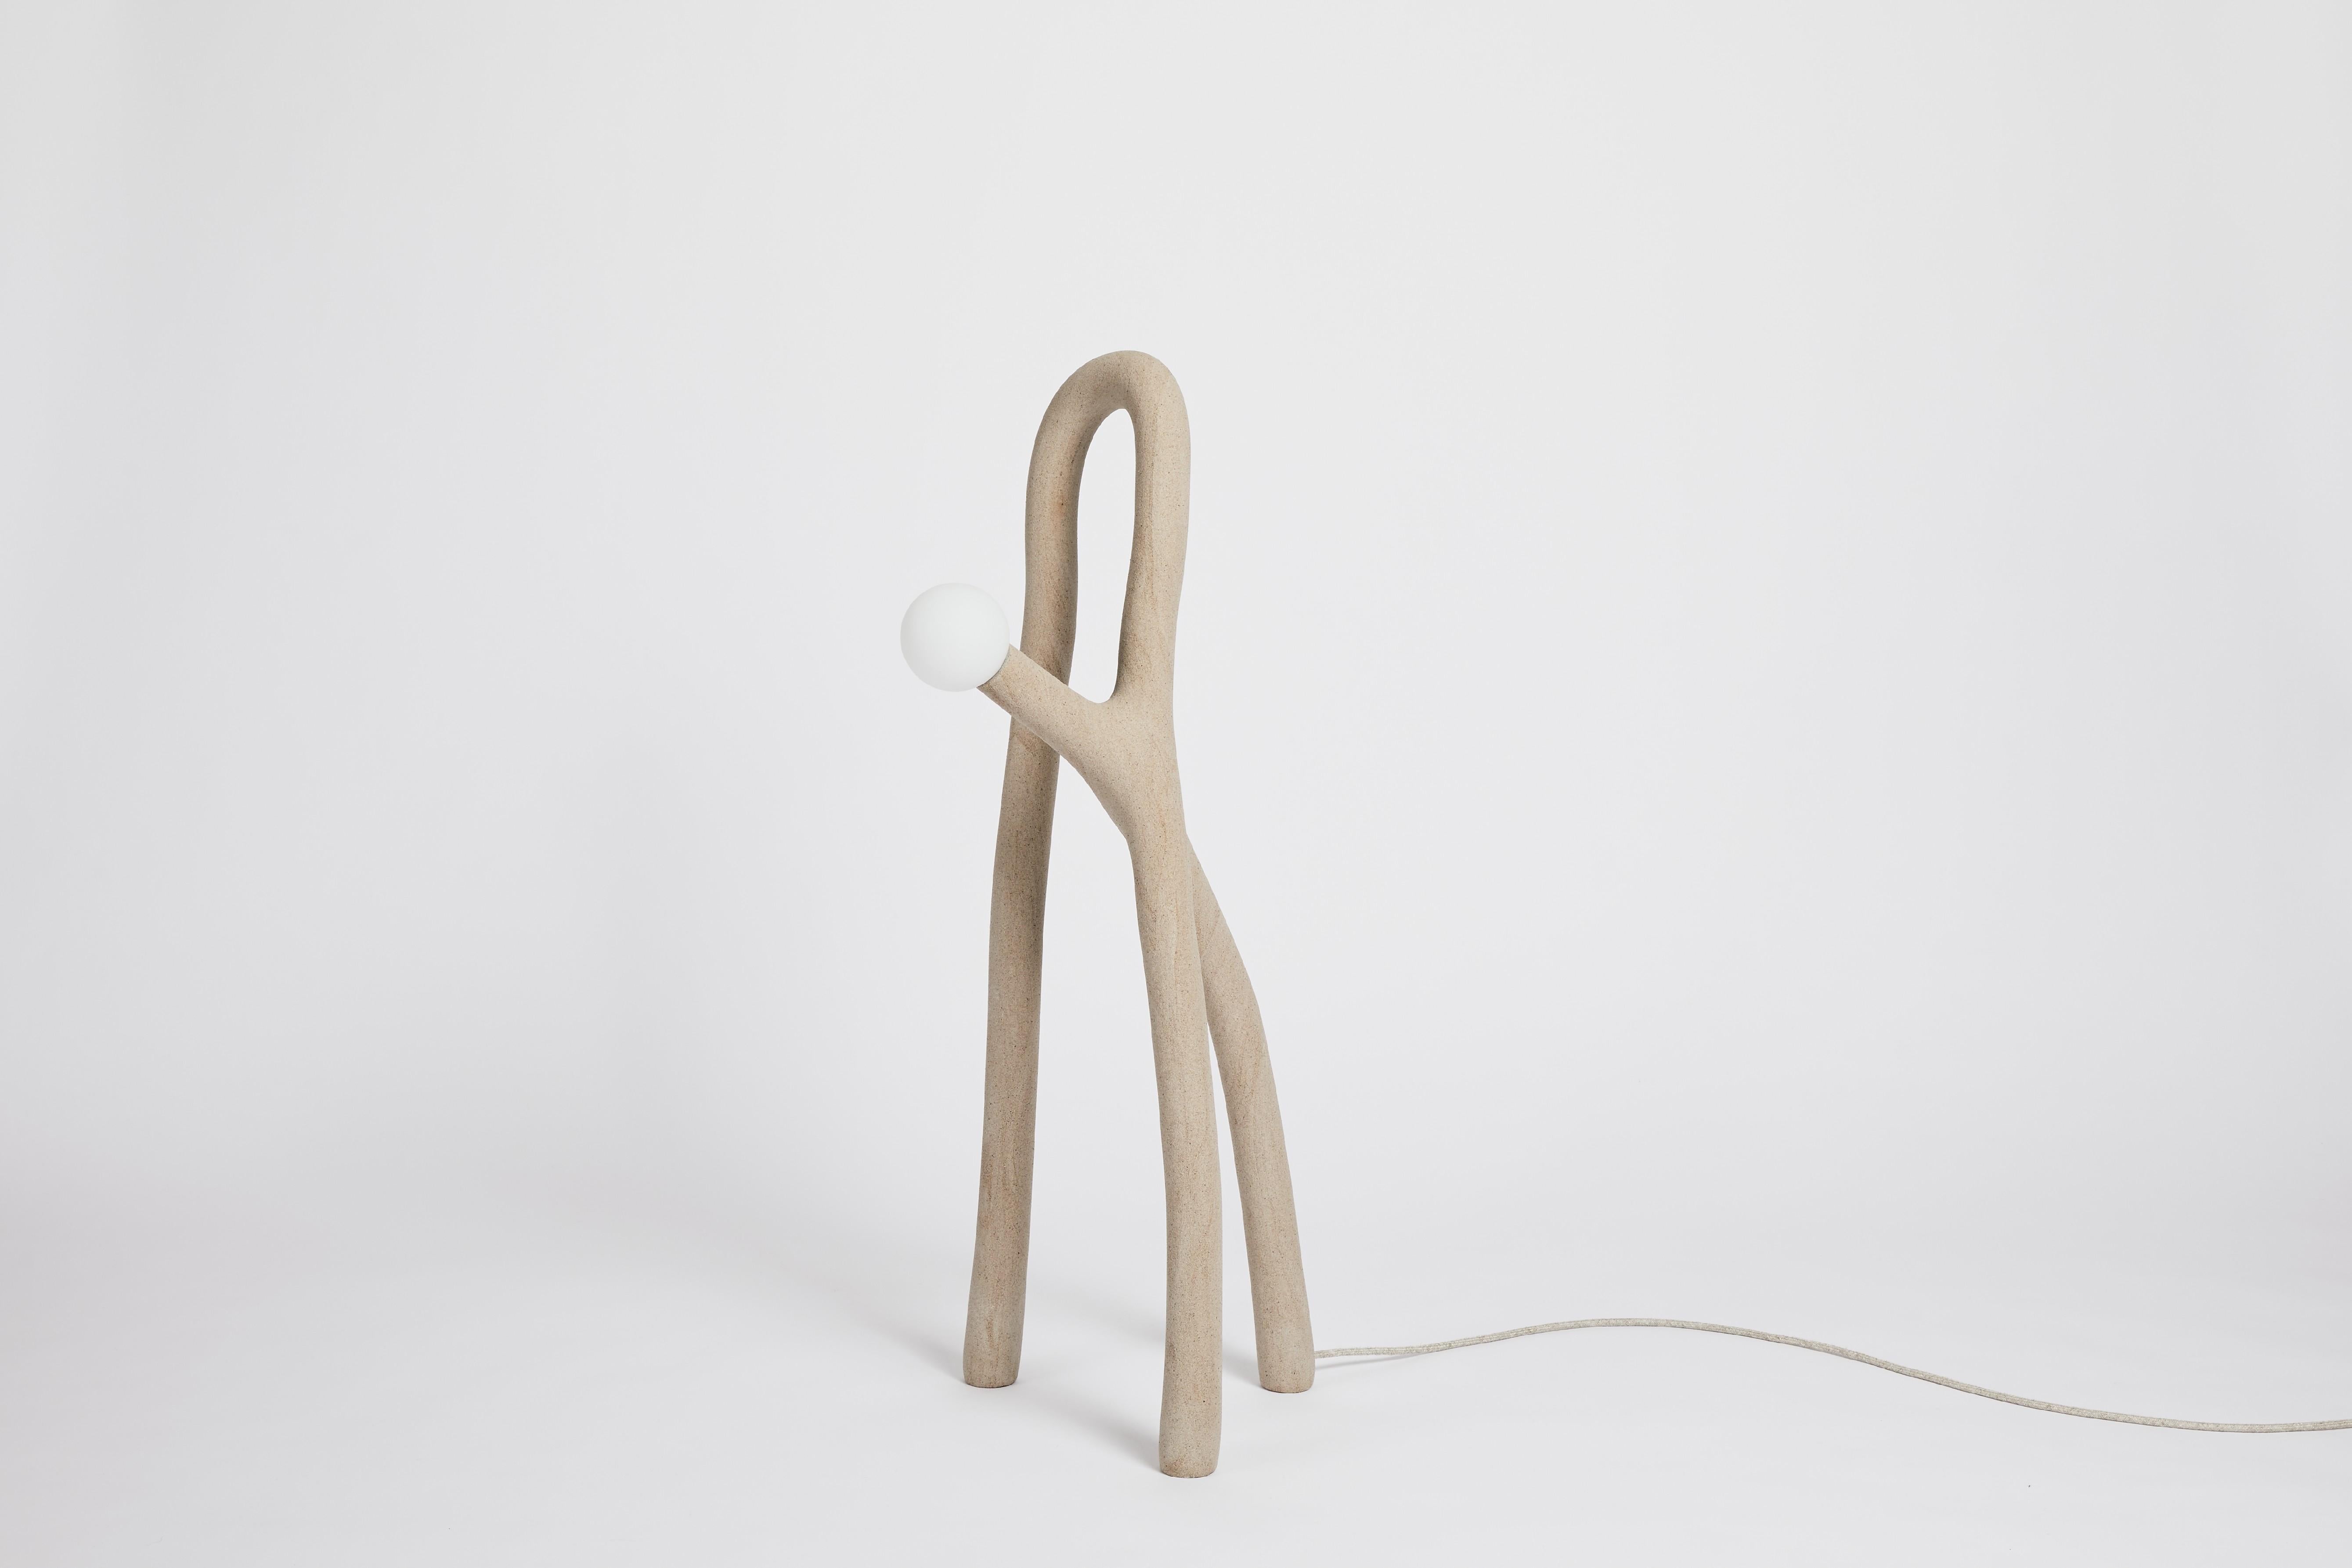 The Native Object 01 is an example of Hot Wire Extensions’ bold innovative manufacturing process. Hot Wire Extensions is a young sustainable design brand, dedicated to material exploration and experimental engineering. The Native Object 01 uses Hot